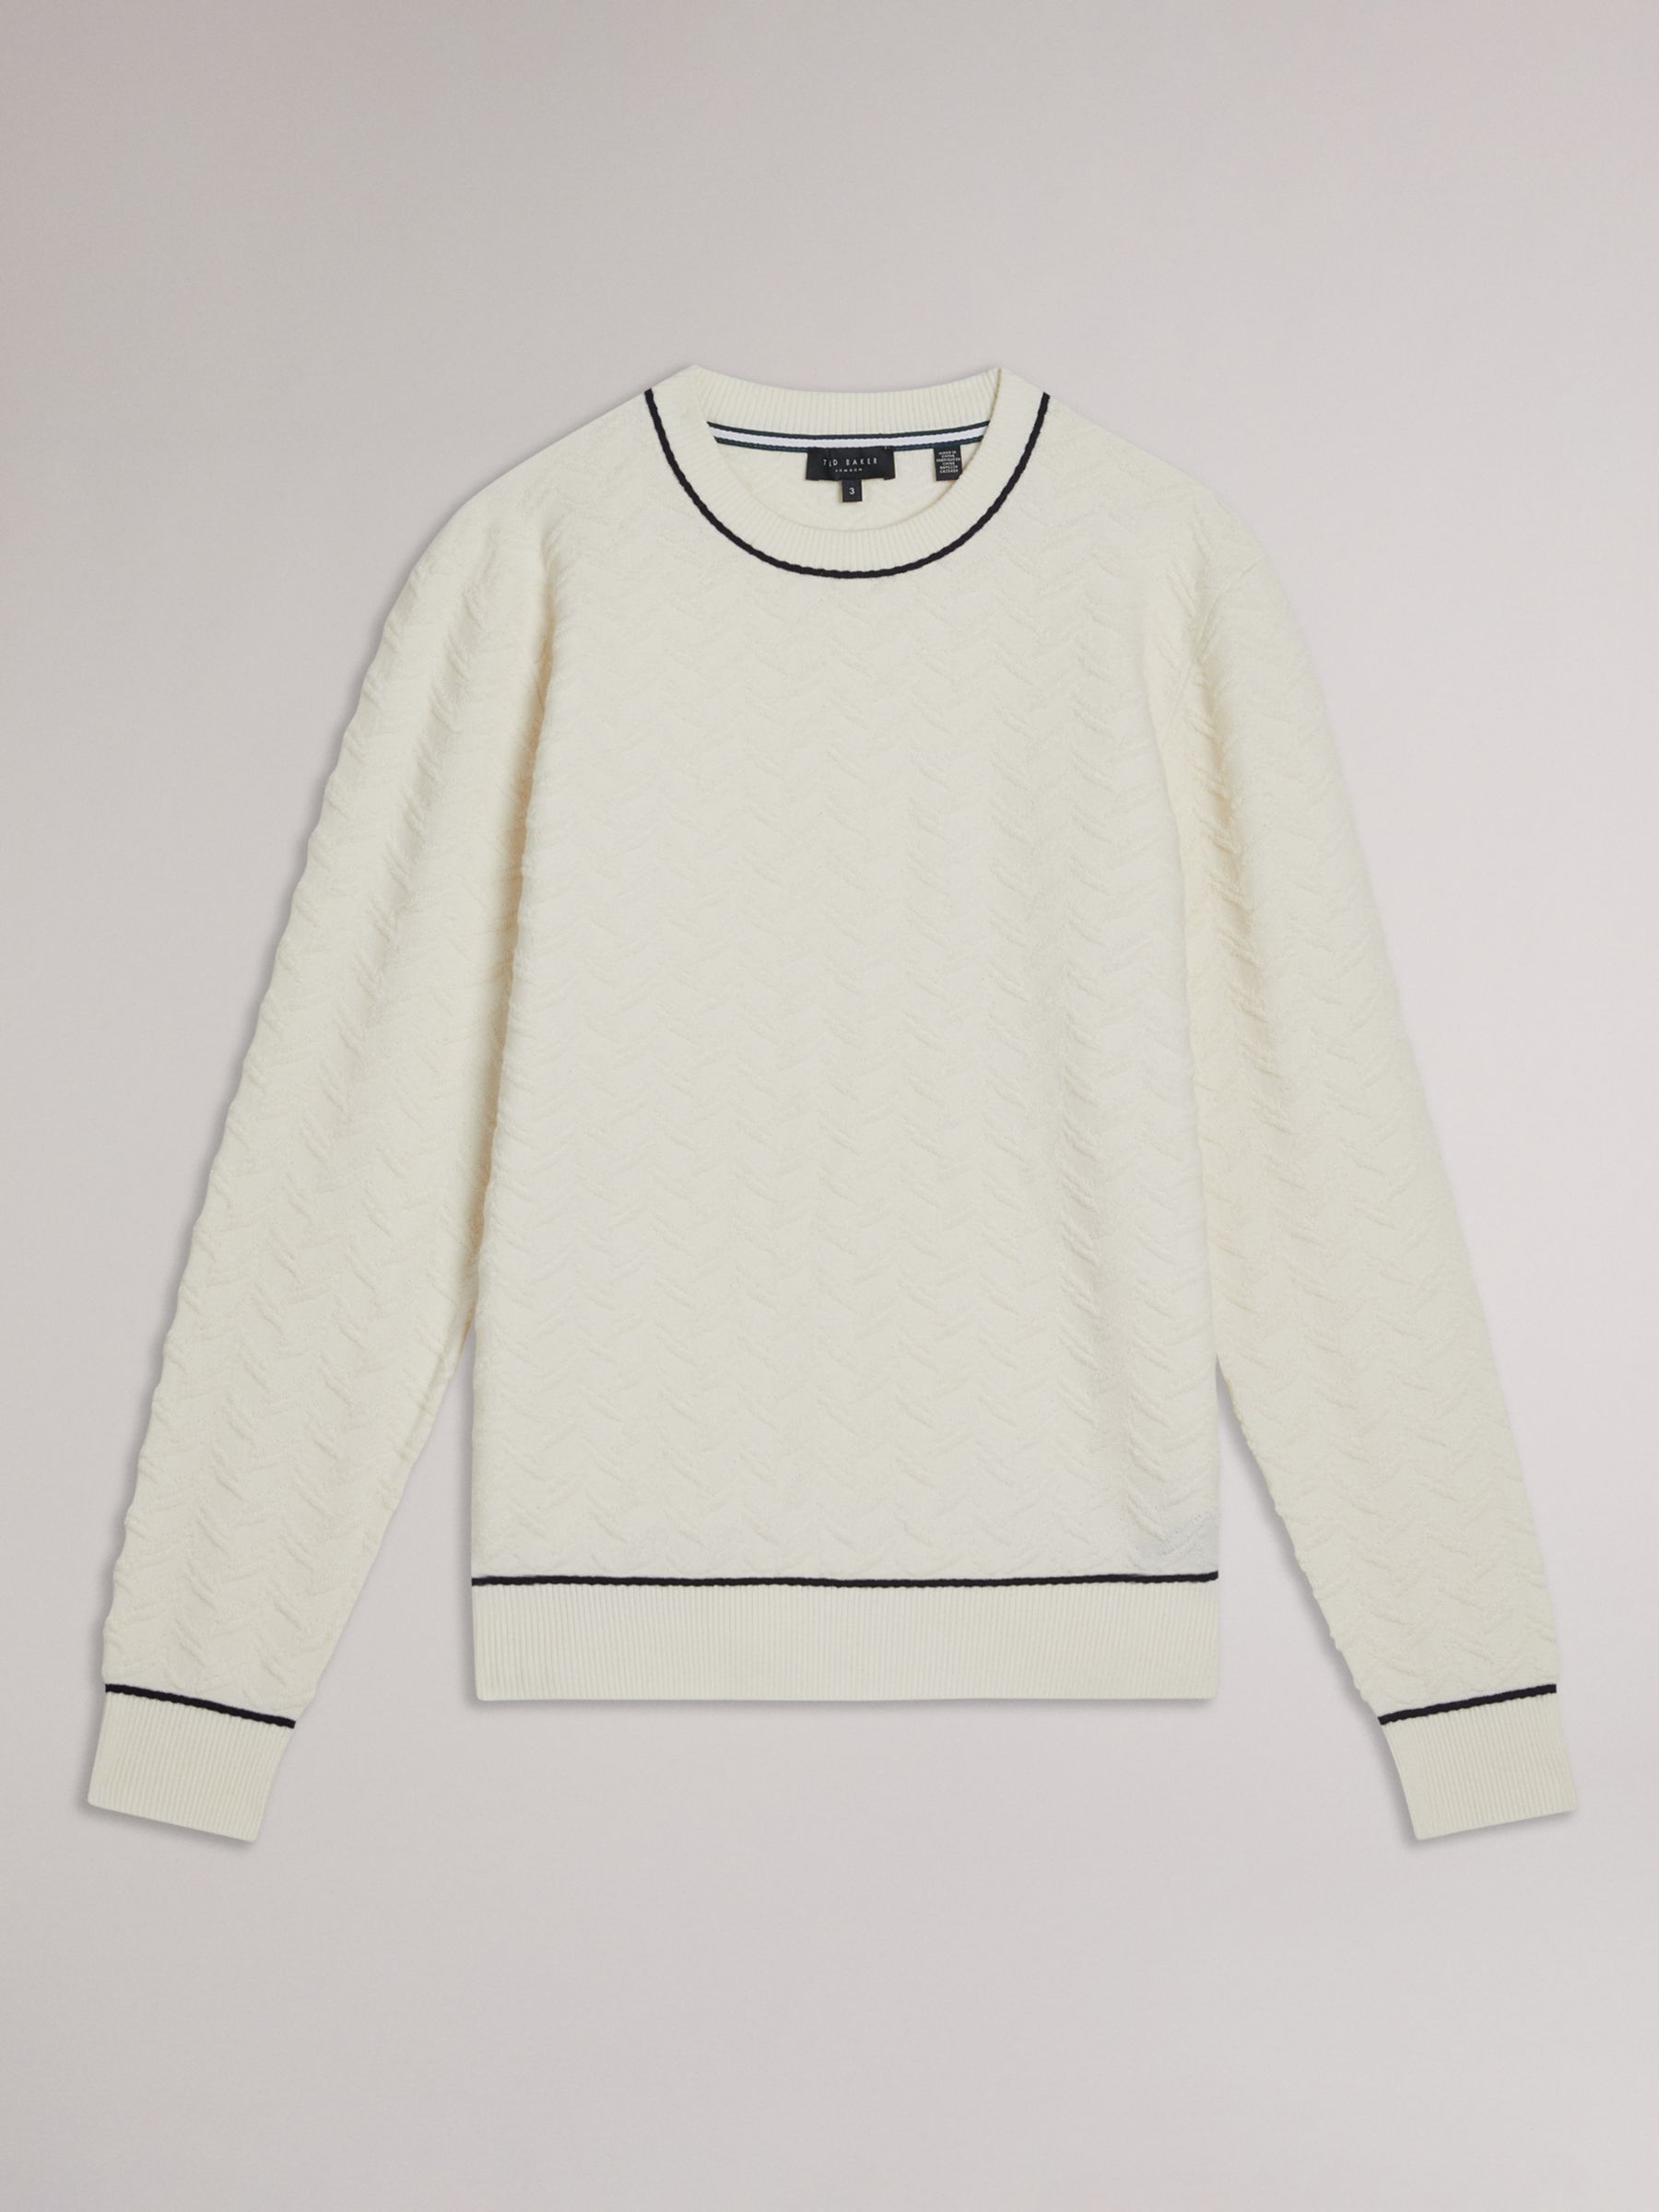 Ted Baker Sepal Long Sleeve Textured Crew Neck Jumper, White, XS